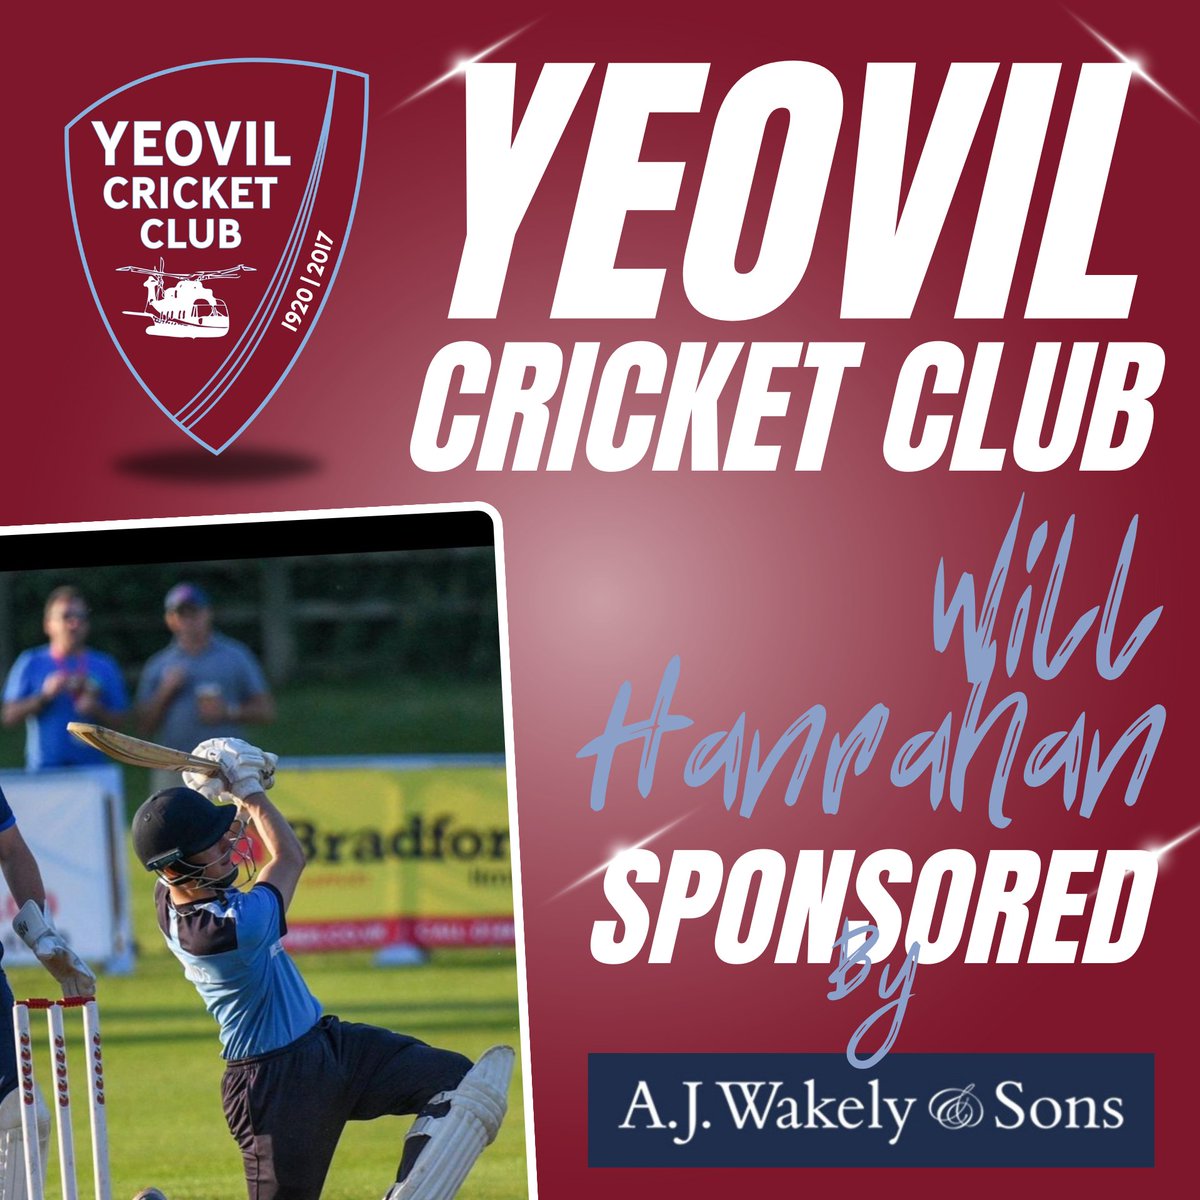 📝 Player Sponsorship 📝 Thanks to A J Wakely and Sons for their support this season. This year they will be sponsoring Will Hanrahan 🏏 ajwakely.com #YCC